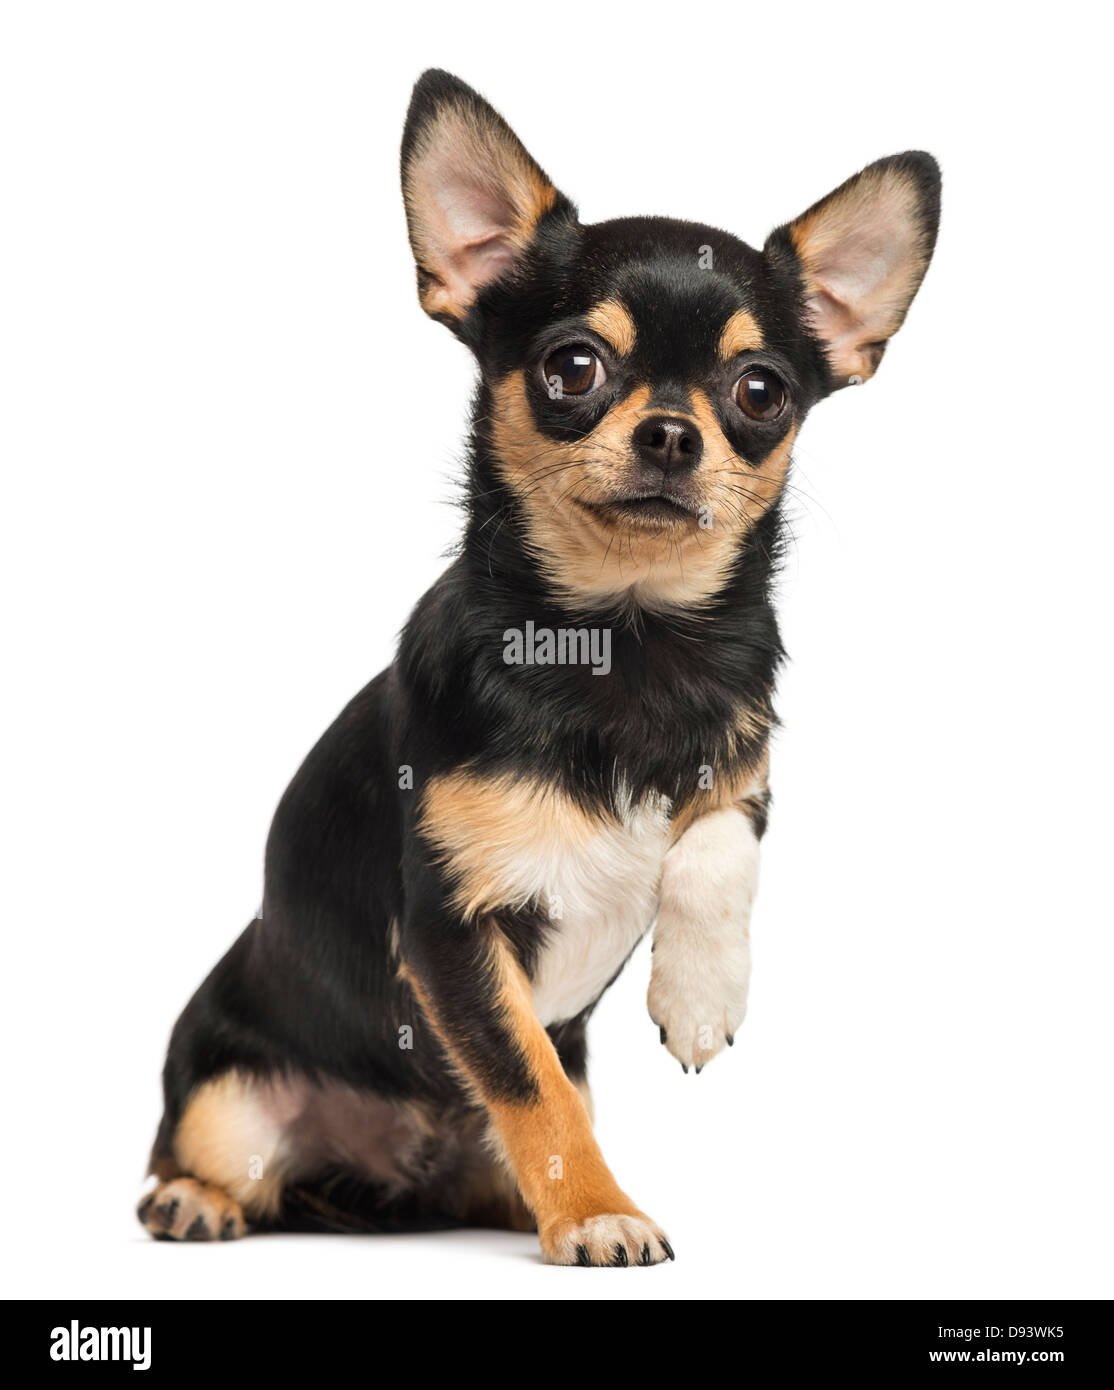 Chihuahua lifting a paw, 8 months old, sitting against white background Stock Photo